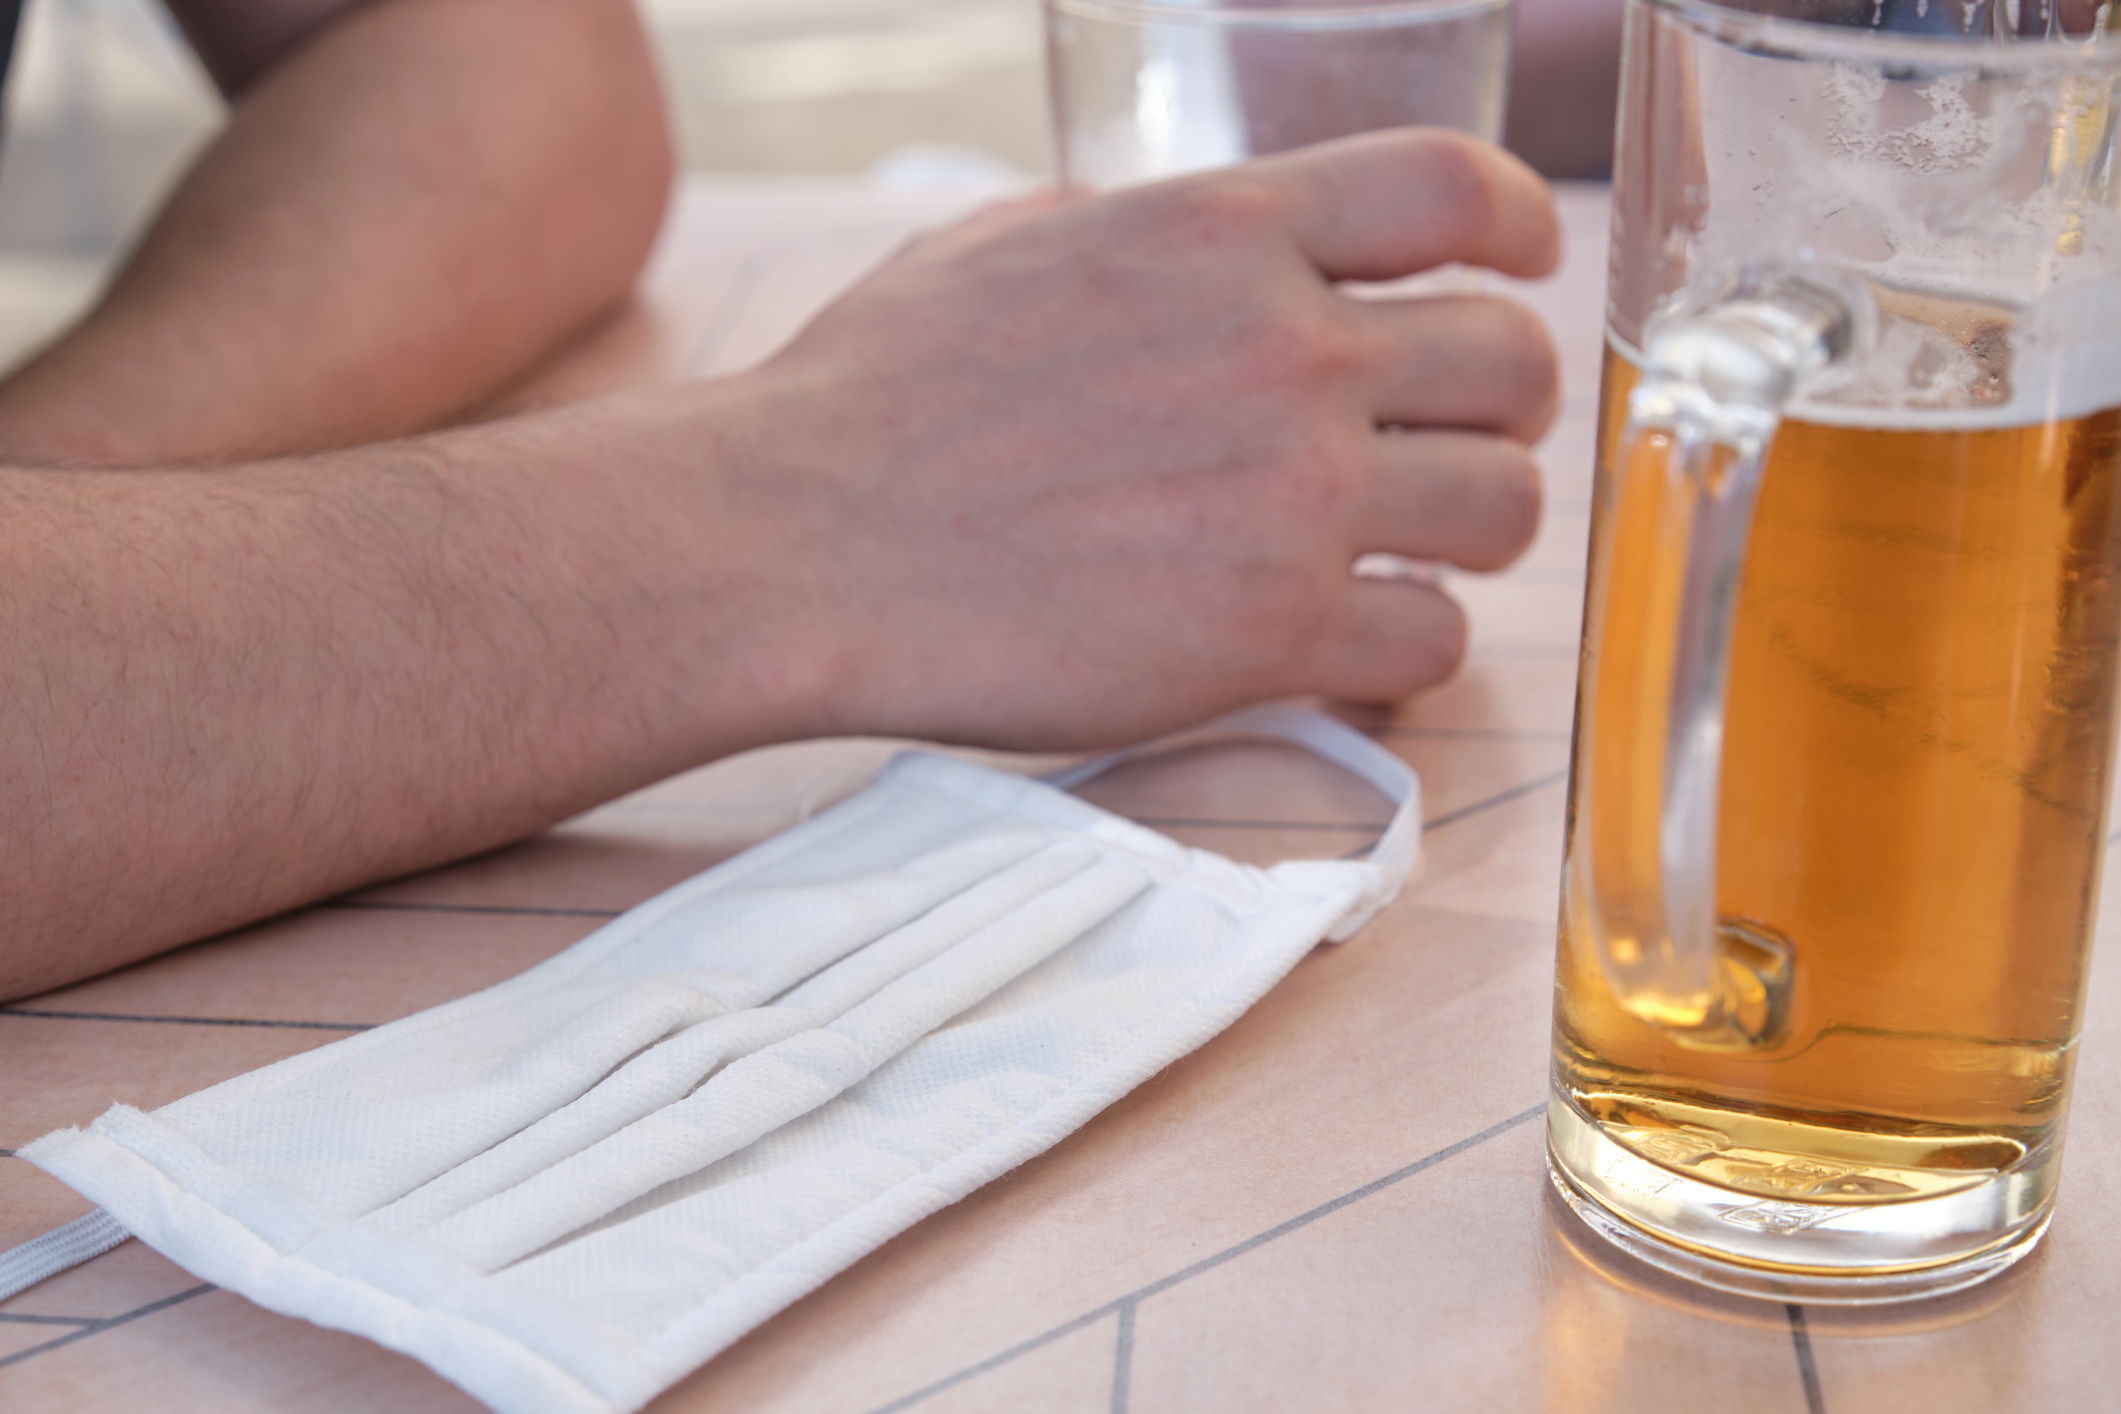 Norway alcohol ban Omicron: beer and surgical mask on table